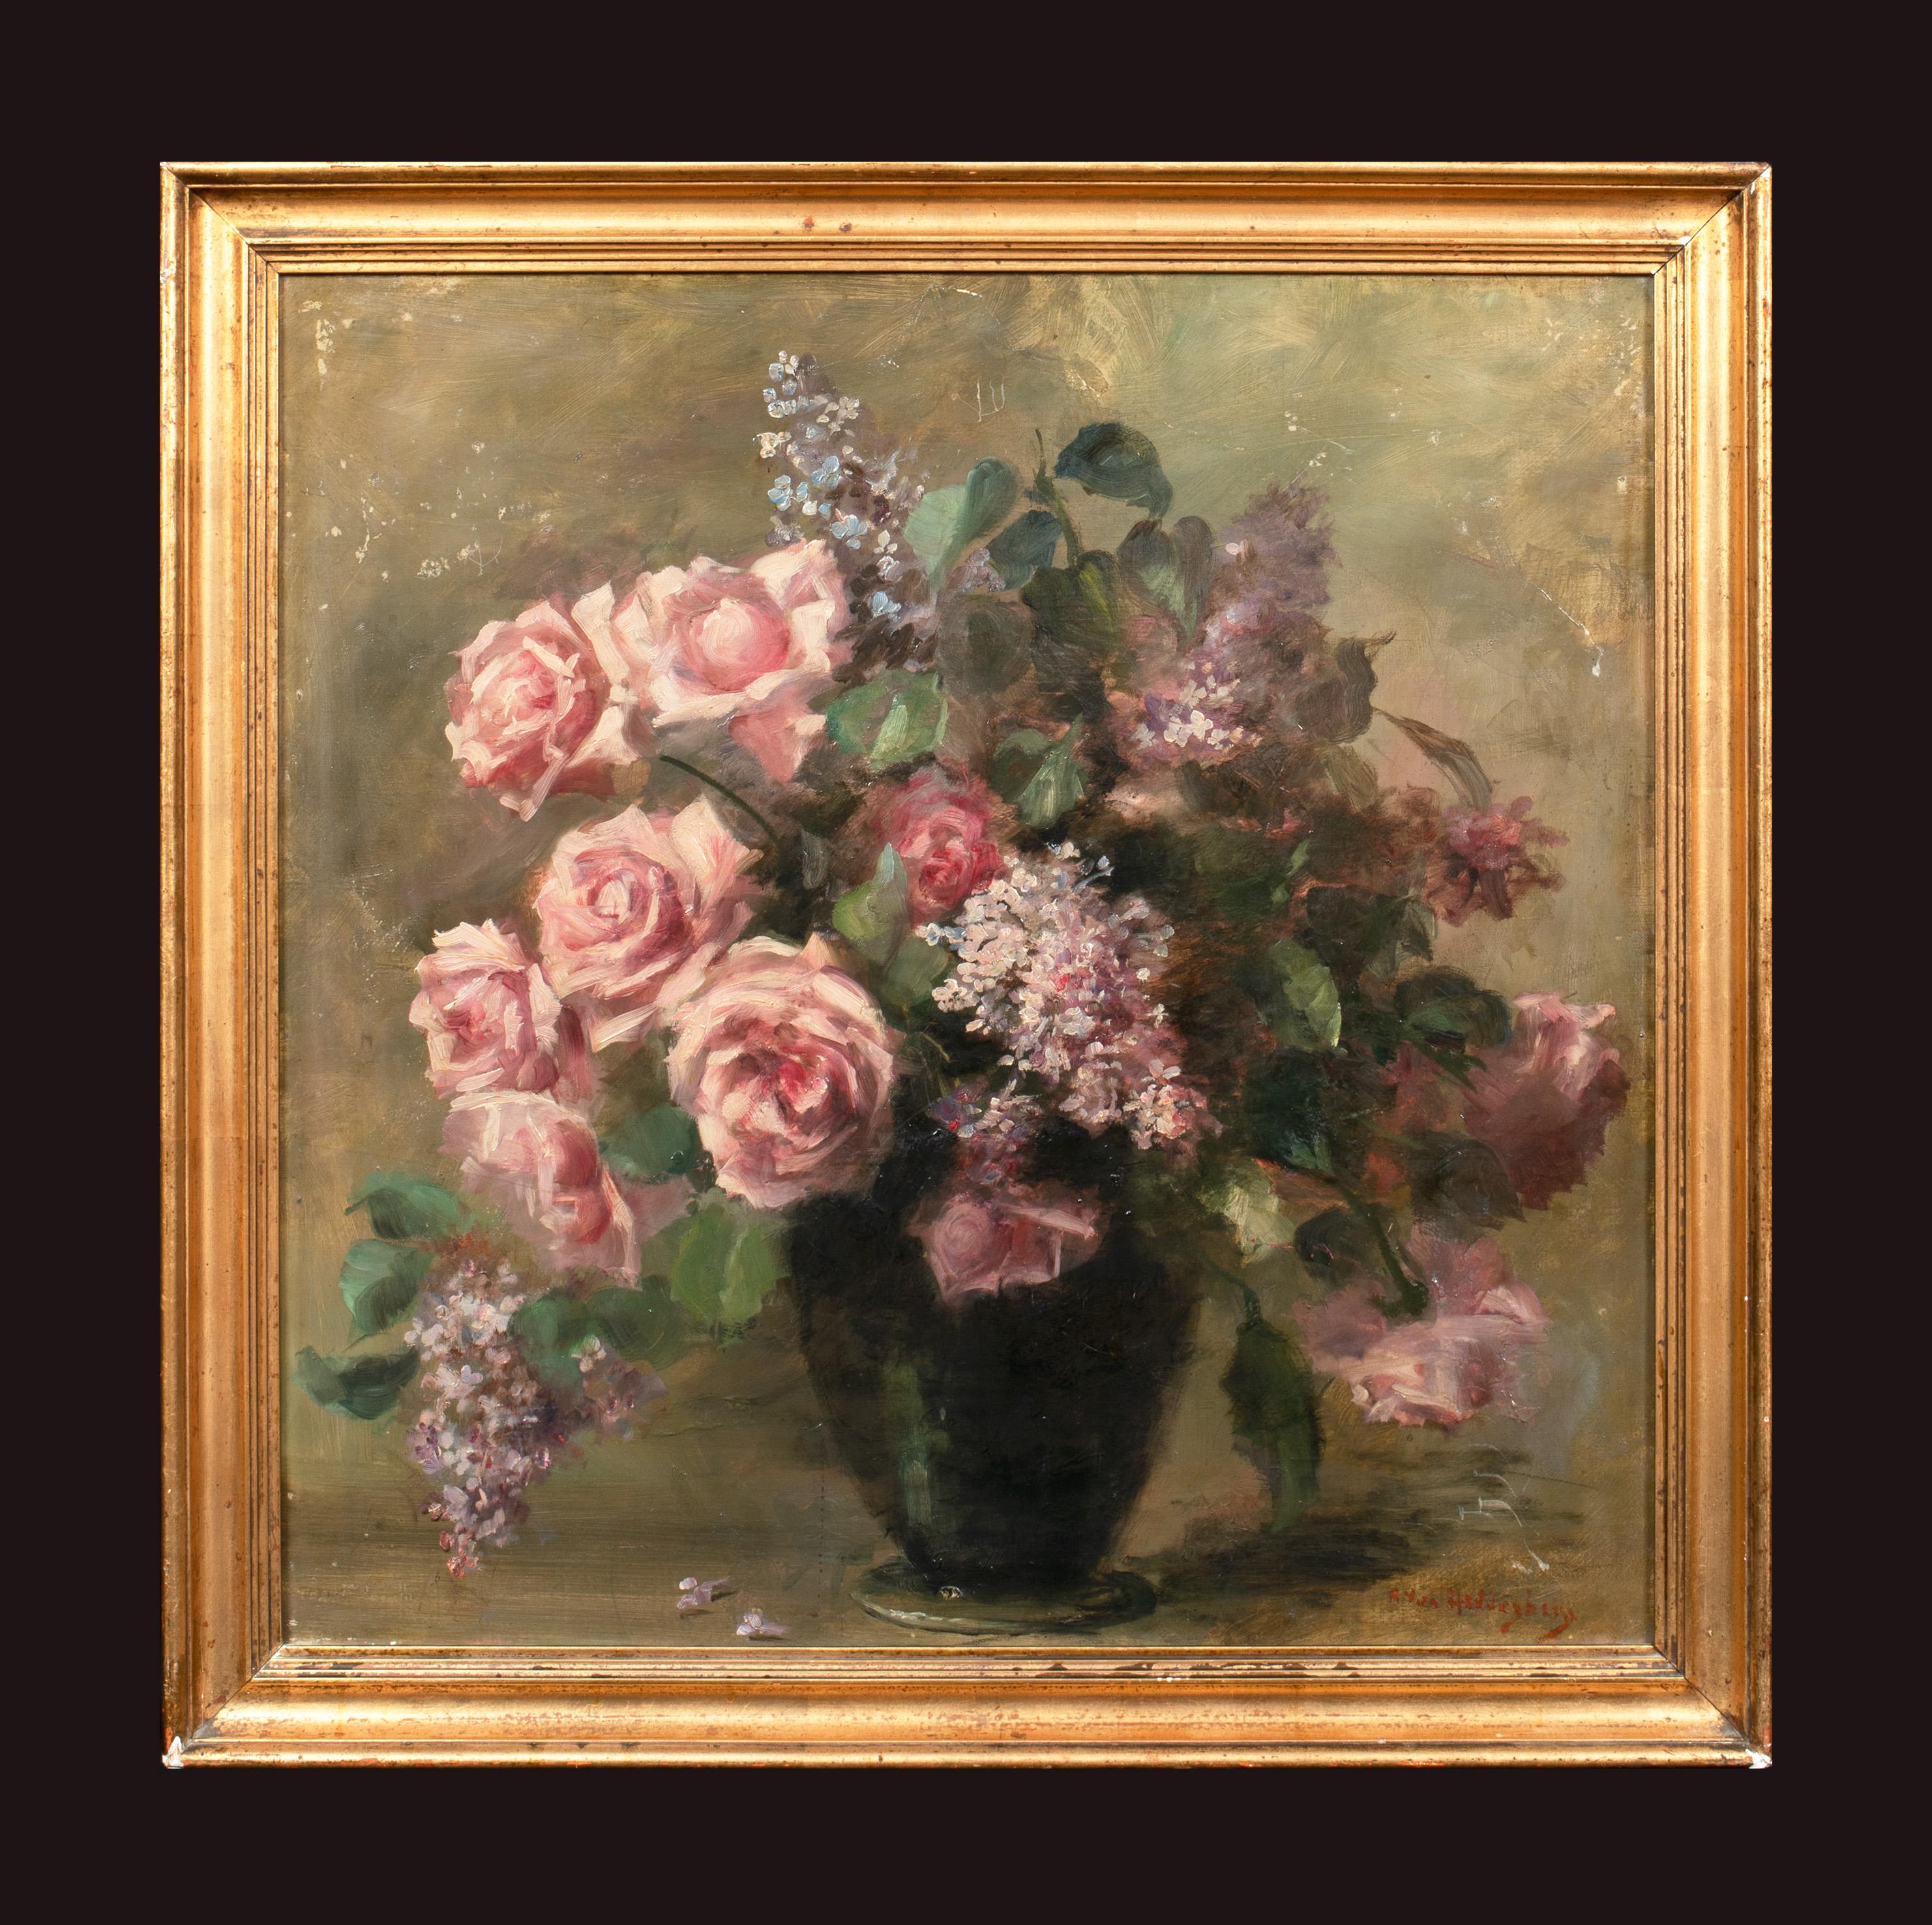 Study Of Pink Roses, 19th Century  - Painting by Unknown